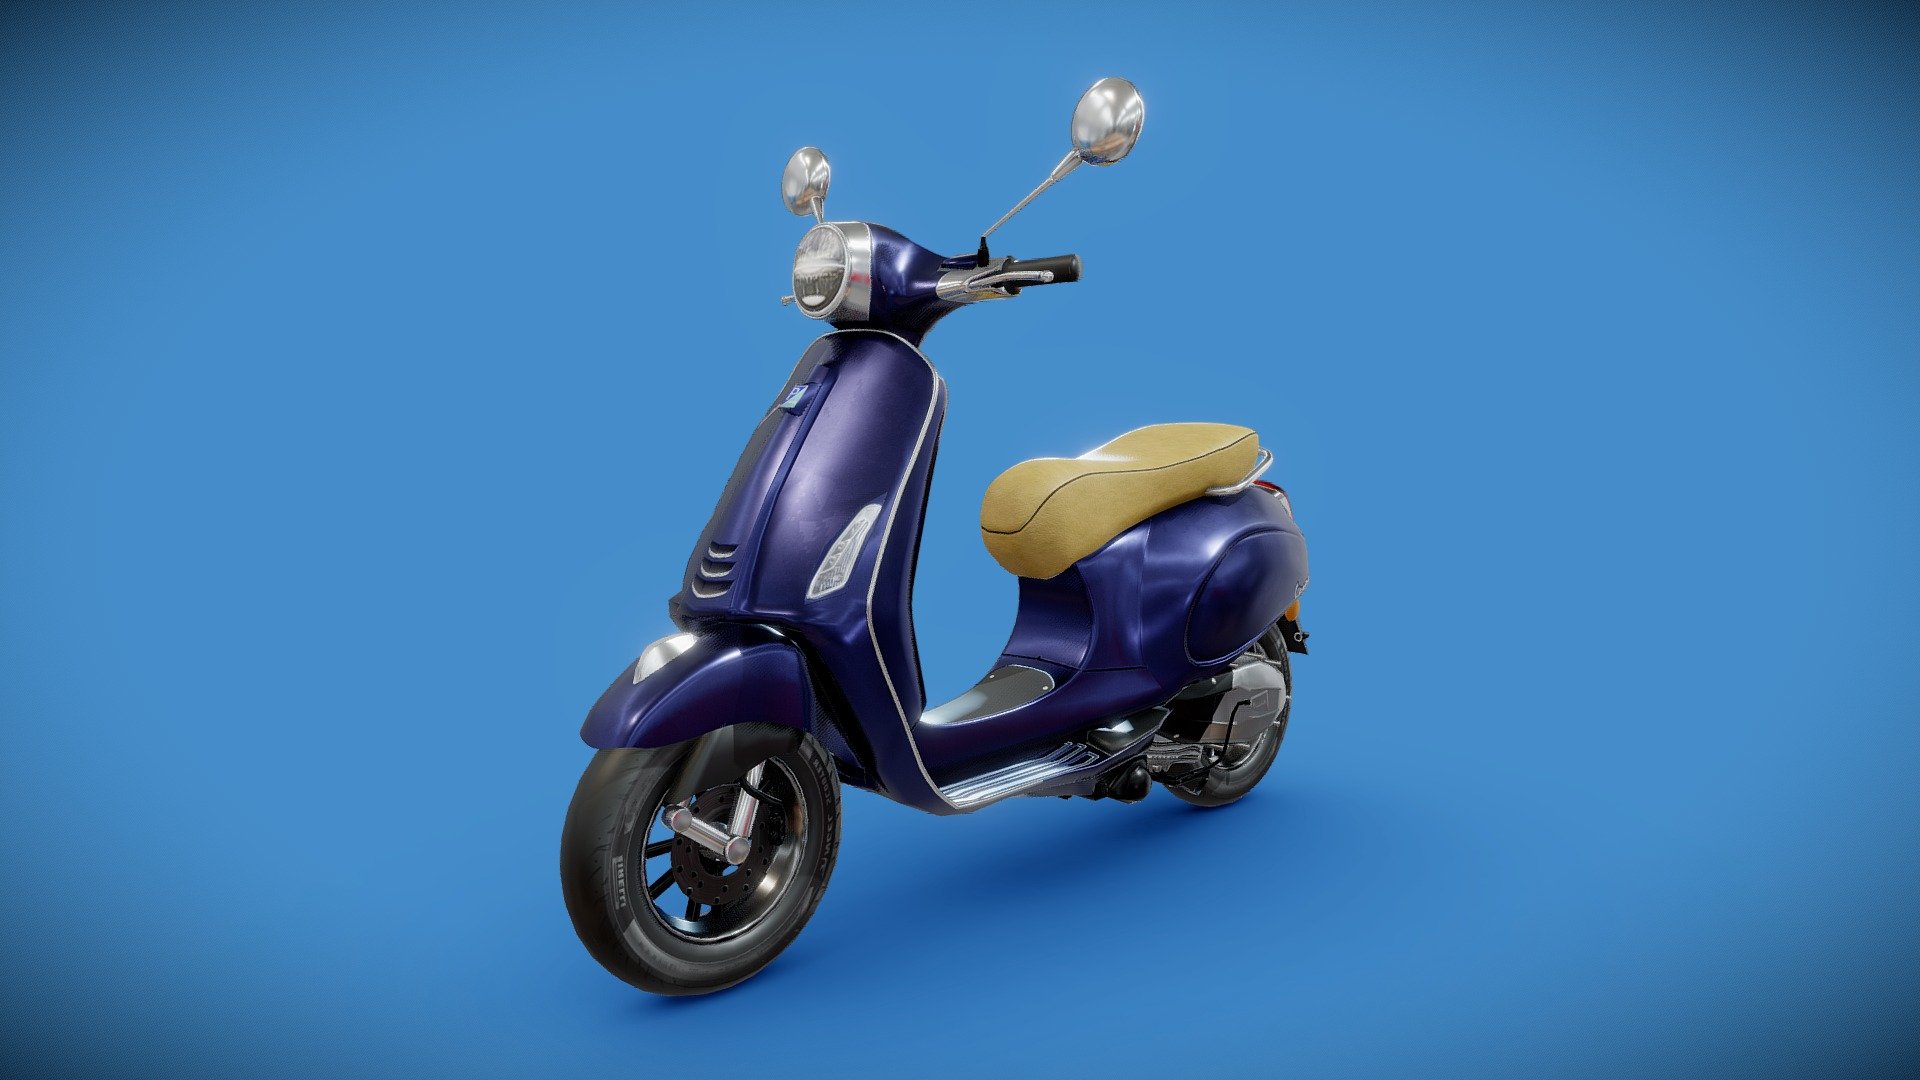 This is Vespa Primavera 150 model of Scooty 3d Model.

The model was created in Maya 2018, rendered with Substance painter, Clean topology. Detailed High quality model.

All Materials in this pack are provide with all named.

Model Type: Polygonal
Polygons: 18,341
Vertices: 18,897
Formats available: Maya ASCII 2018, Maya Binary 2018, FBX , OBJ
Textures: Color, Normal, Metallic and Roughness
Texture Resolution: 4096 x 4096 pixels

Hope you like it!

Thank You 3d model